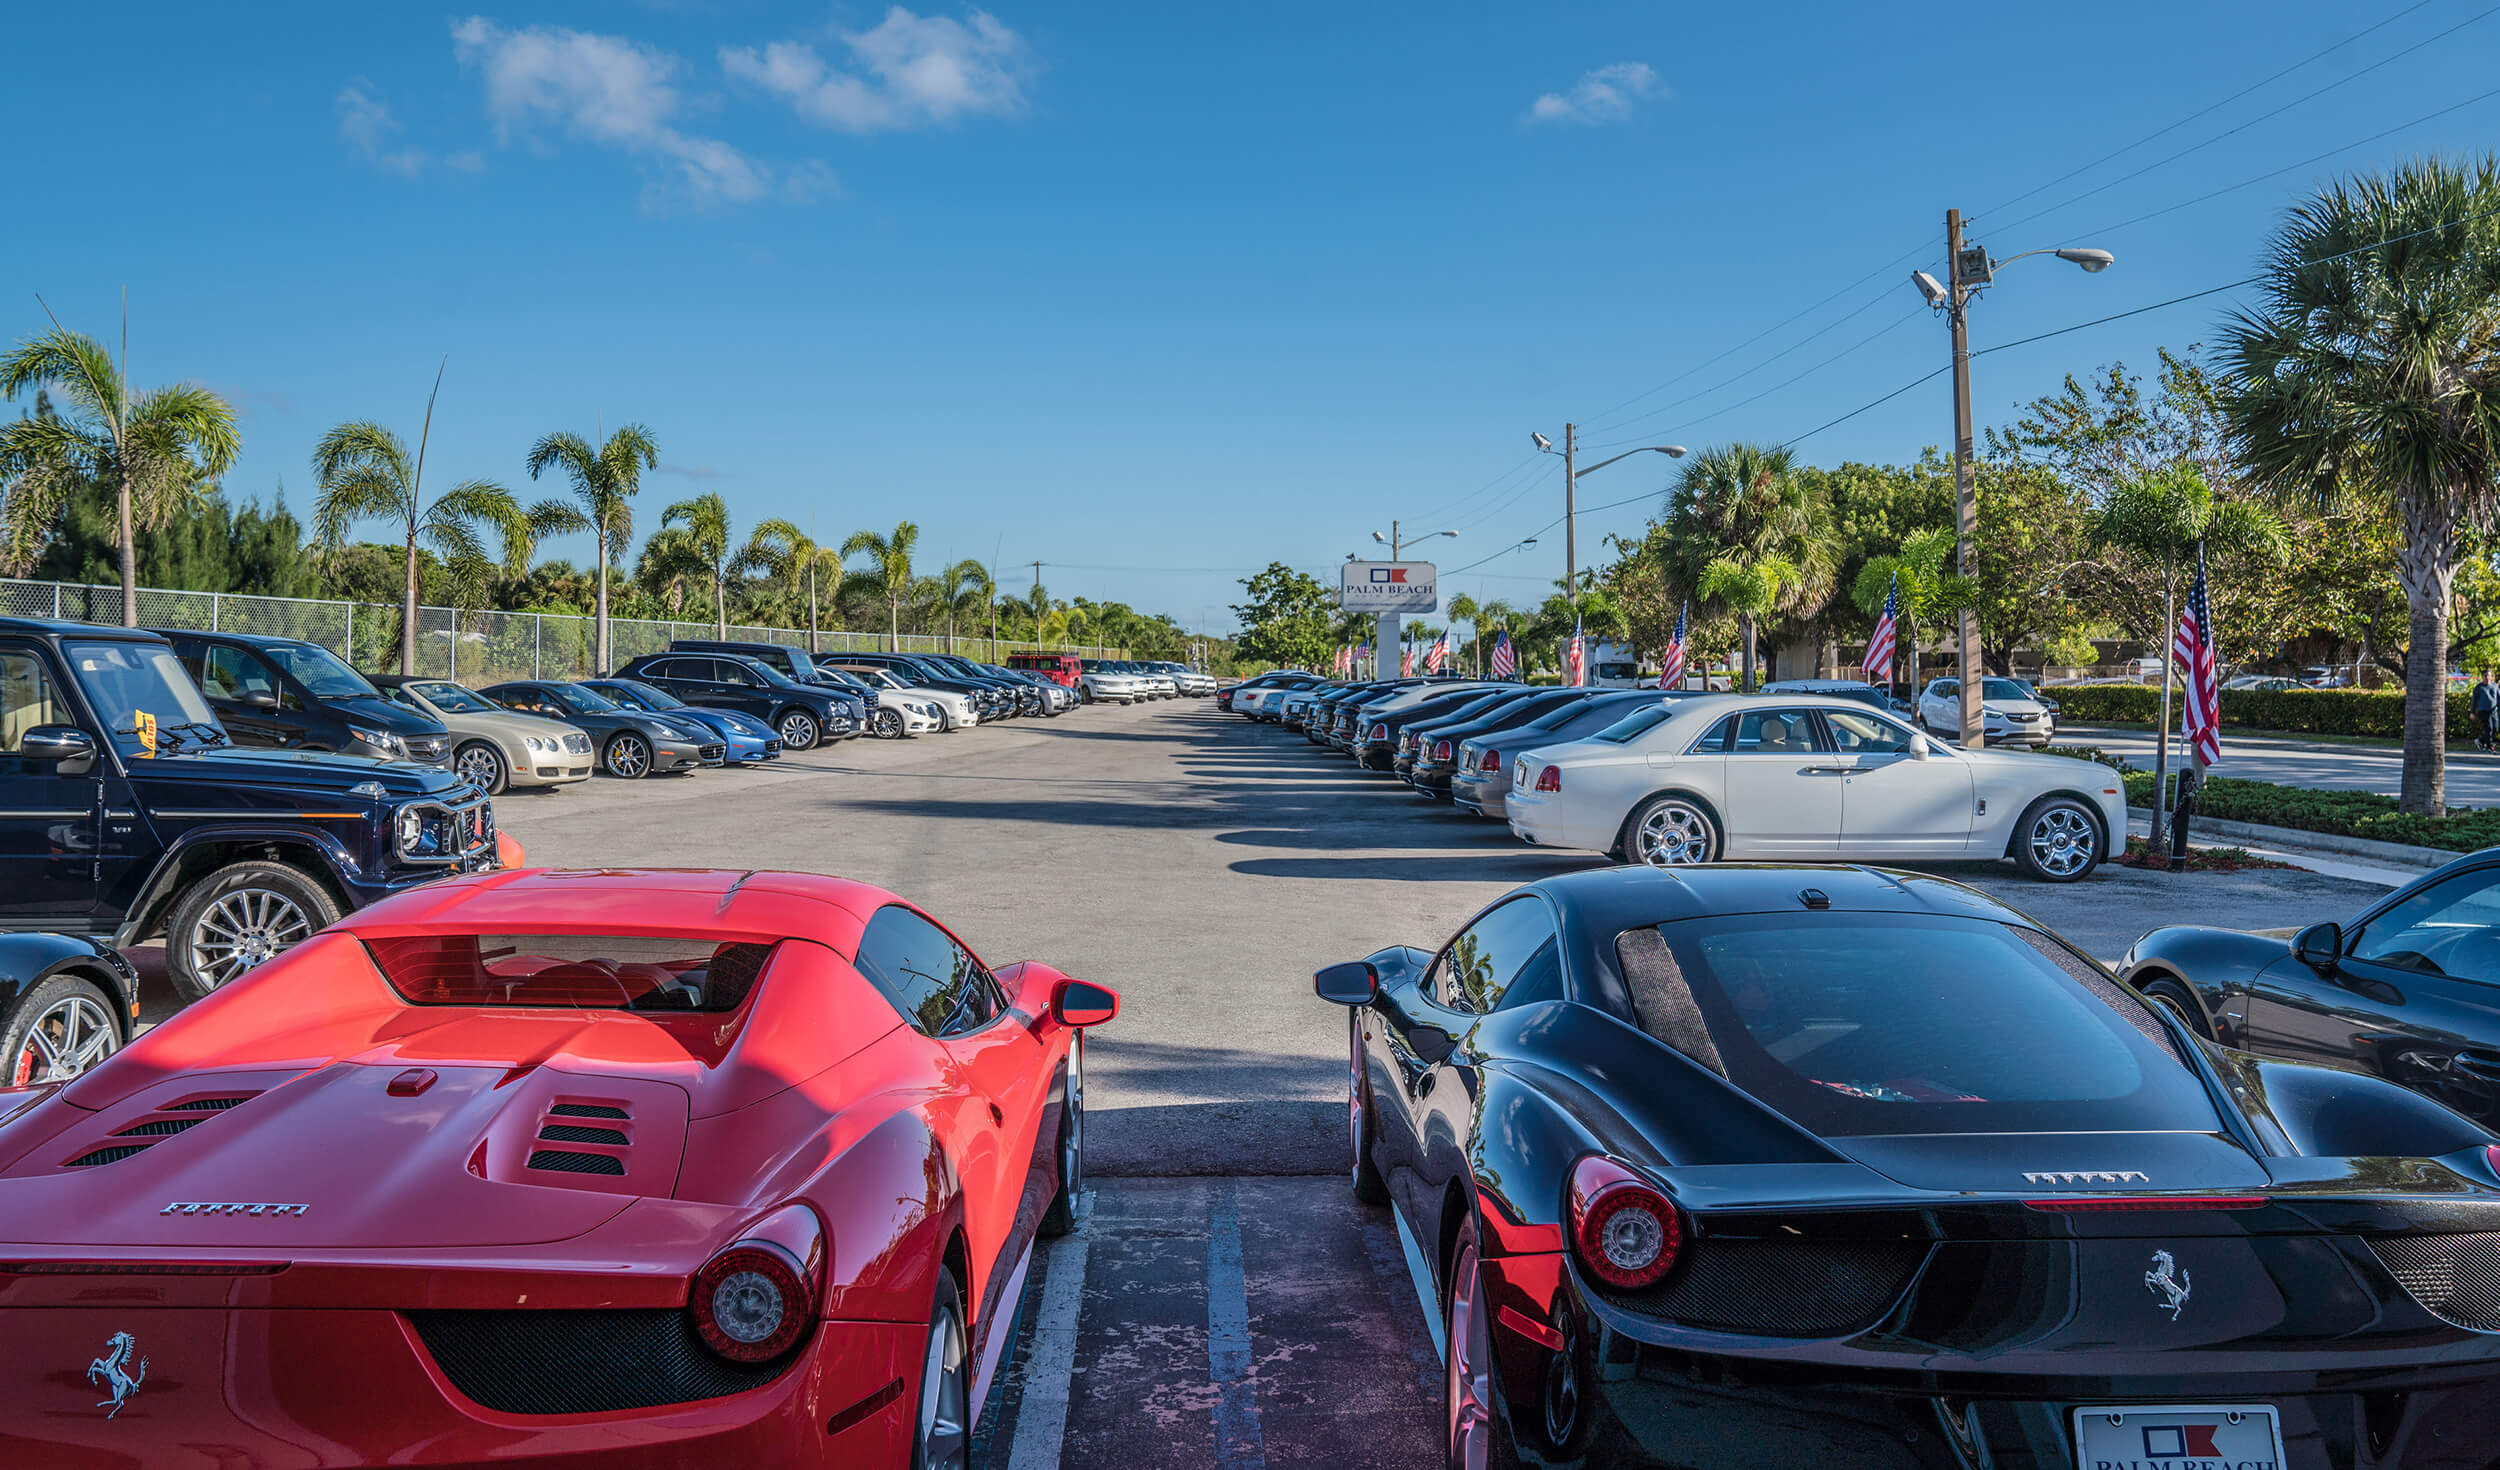 Exterior image of Palm Beach Auto Group dealership: long line of cars and business sign.